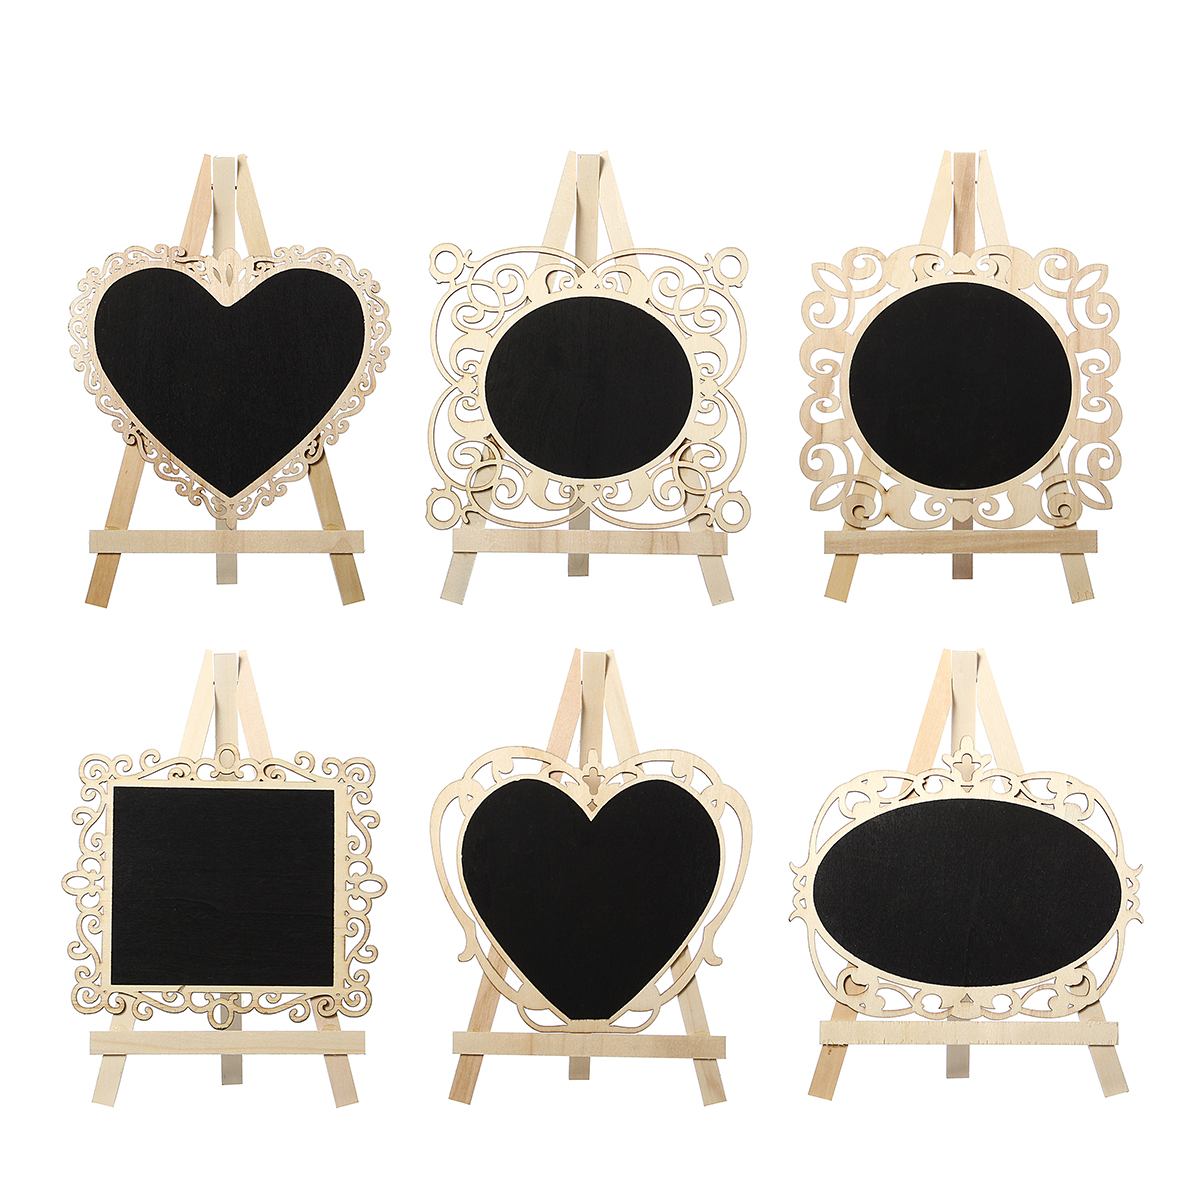 

Mini Vintage Wooden Blackboard Table Number Signs Message Memo Chalk Board Party Decorations